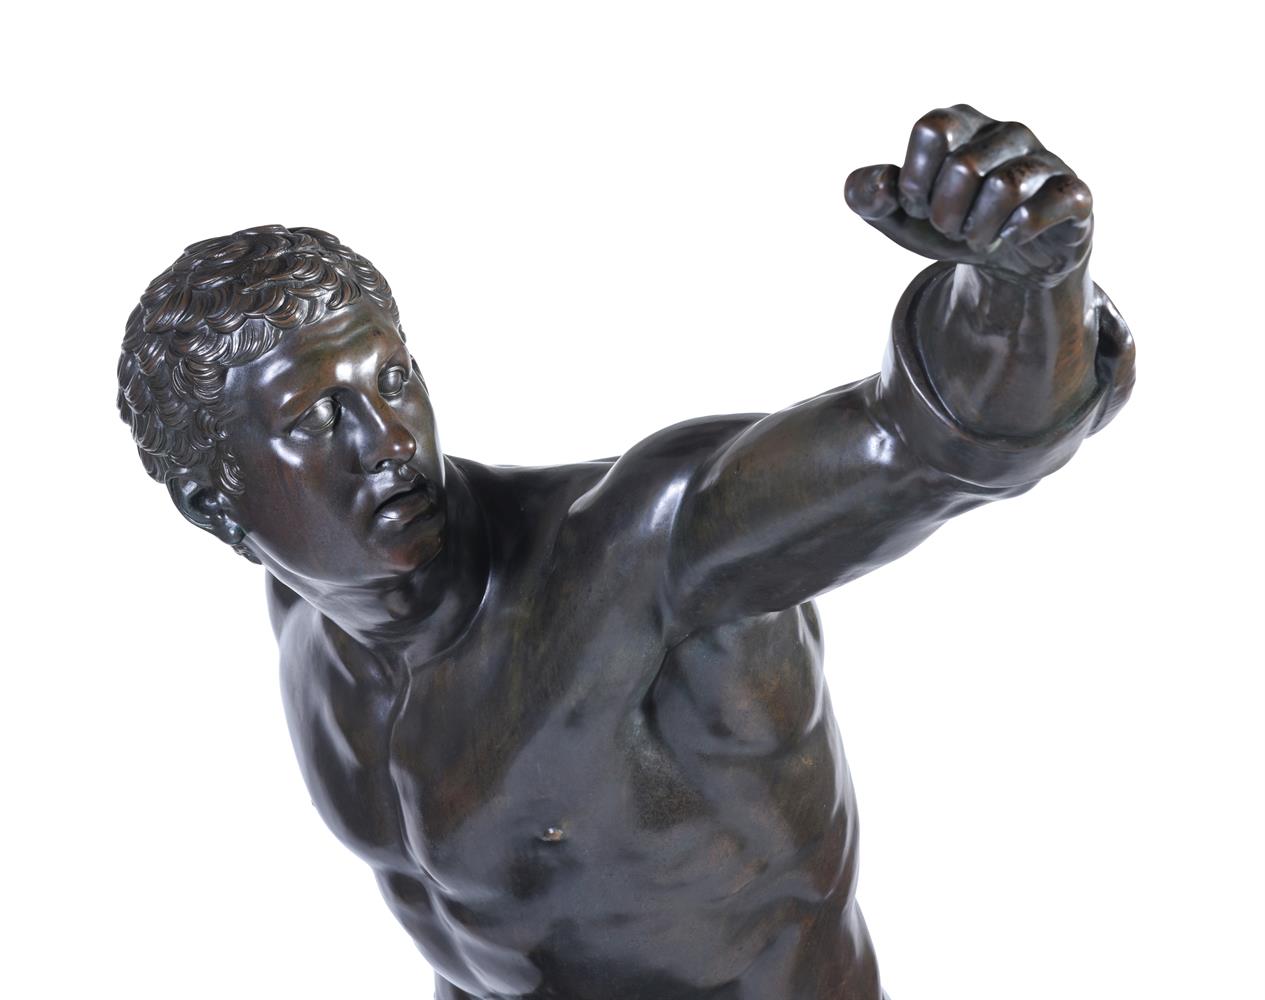 AFTER THE ANTIQUE- A RARE LIFE SIZE BRONZE FIGURE OF THE BORGHESE GLADIATOR,18TH/19TH CENTURY - Image 3 of 4